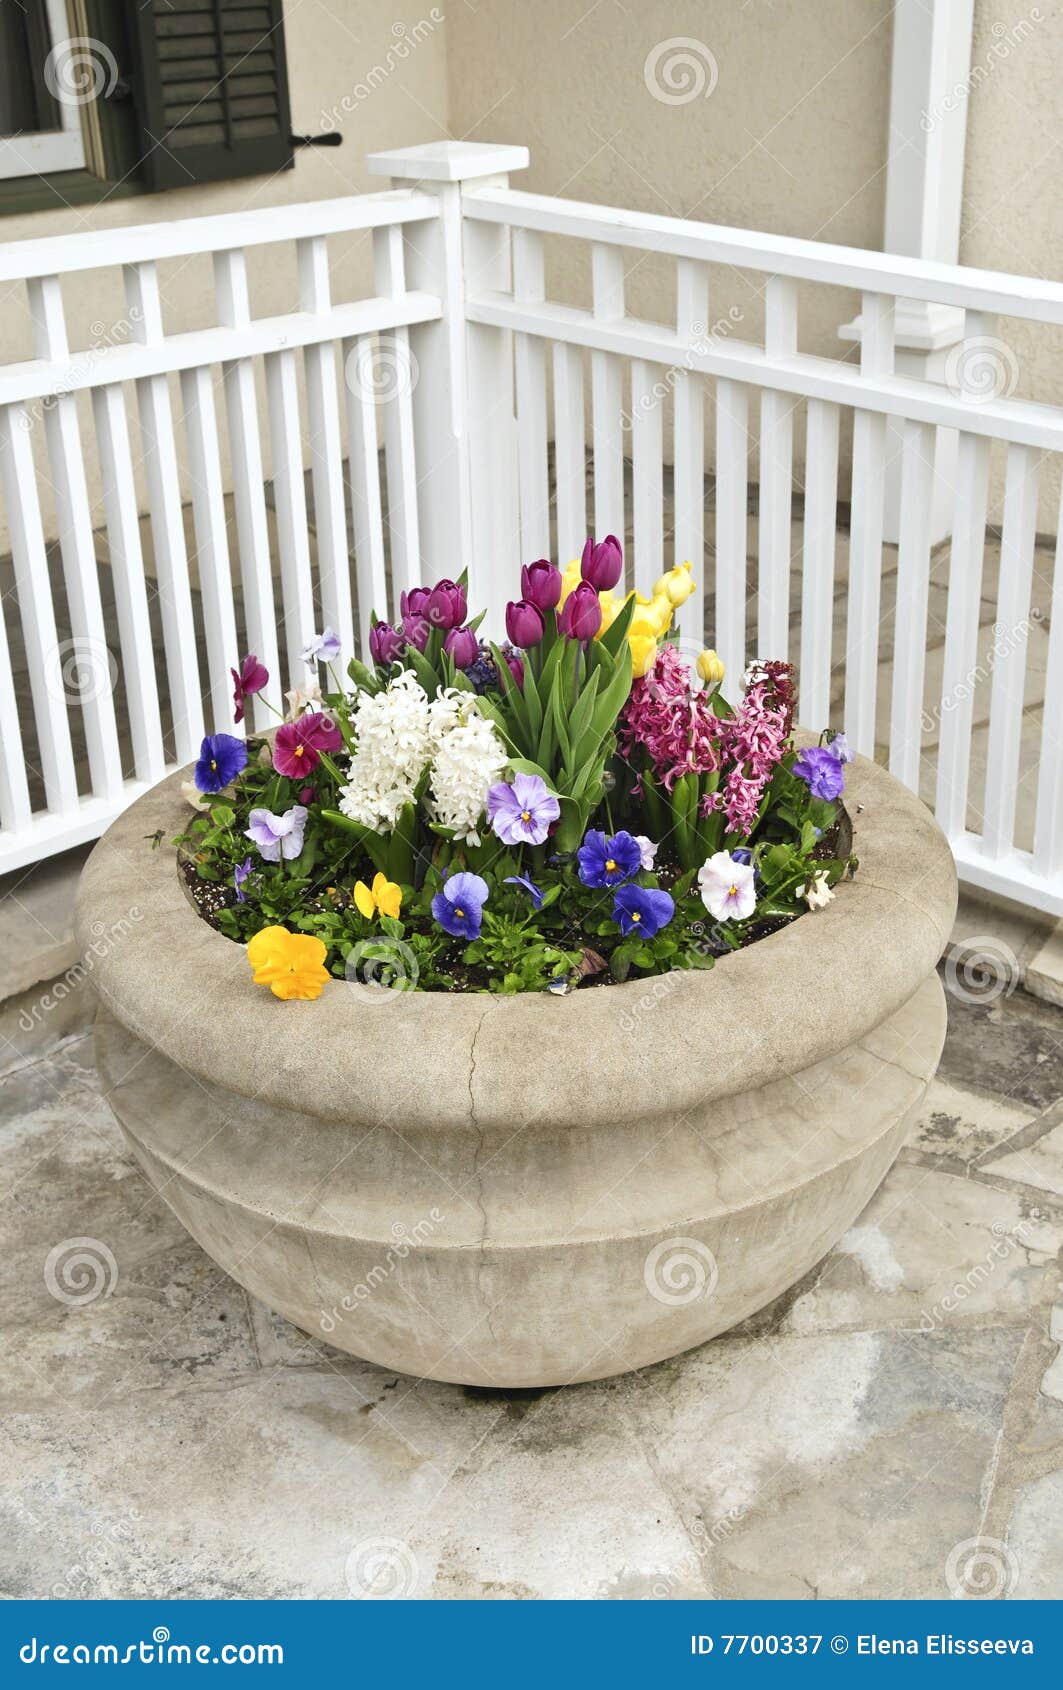 Stone Planter with Spring Flowers Stock Image - Image of landscaped ...